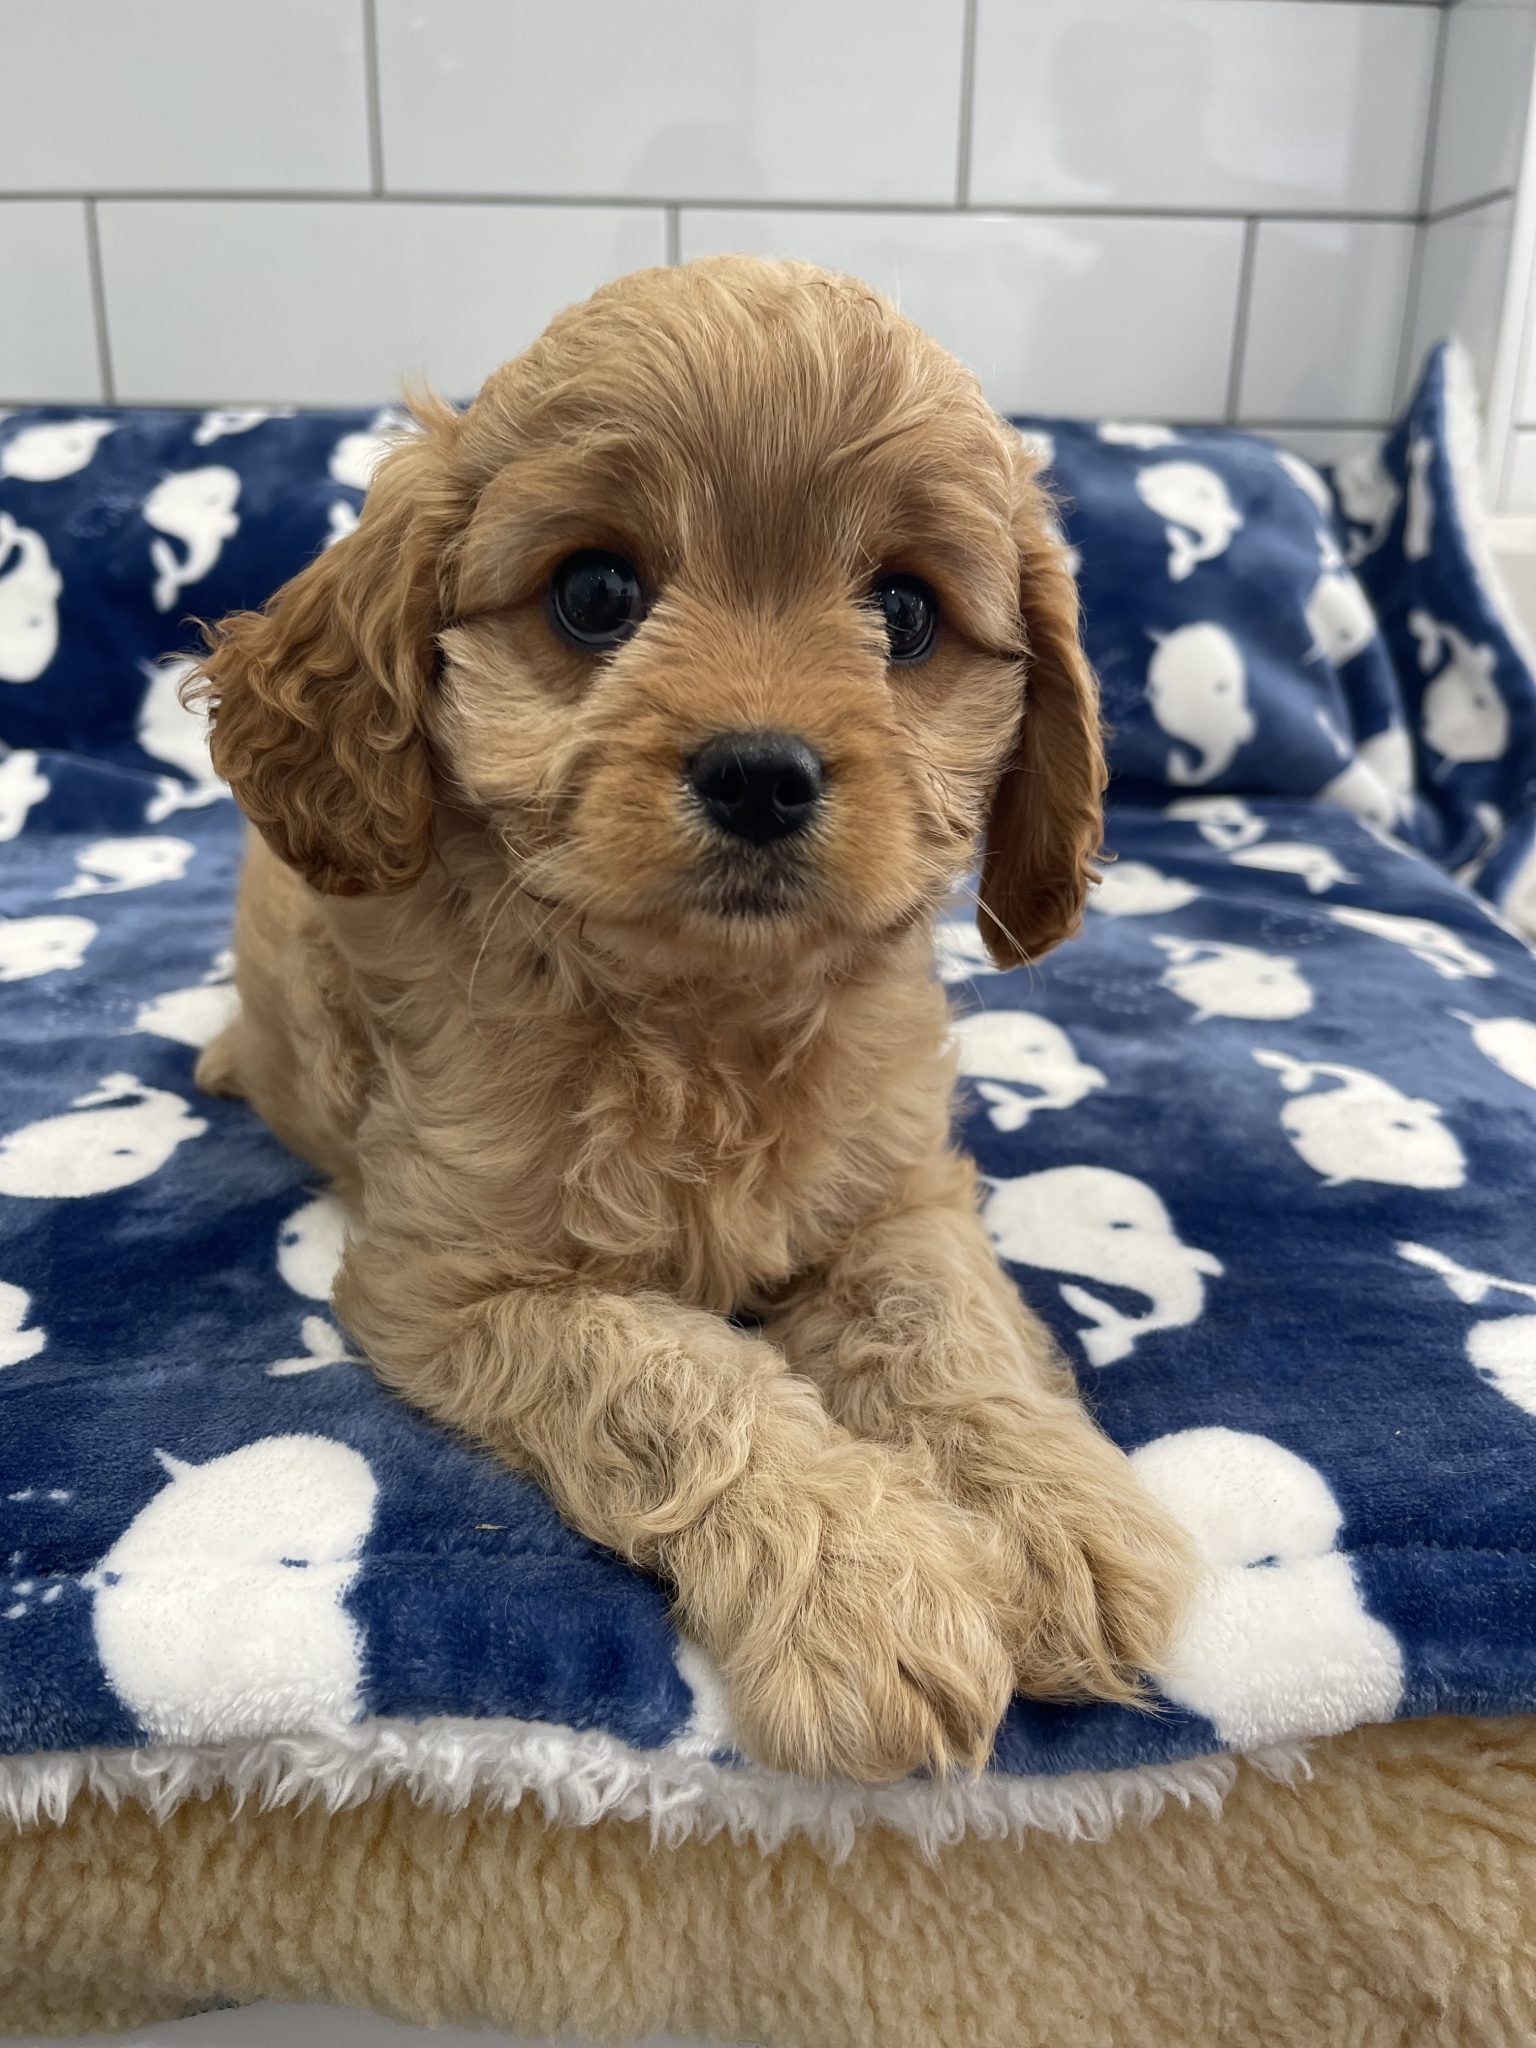 Toy cavoodles for sale